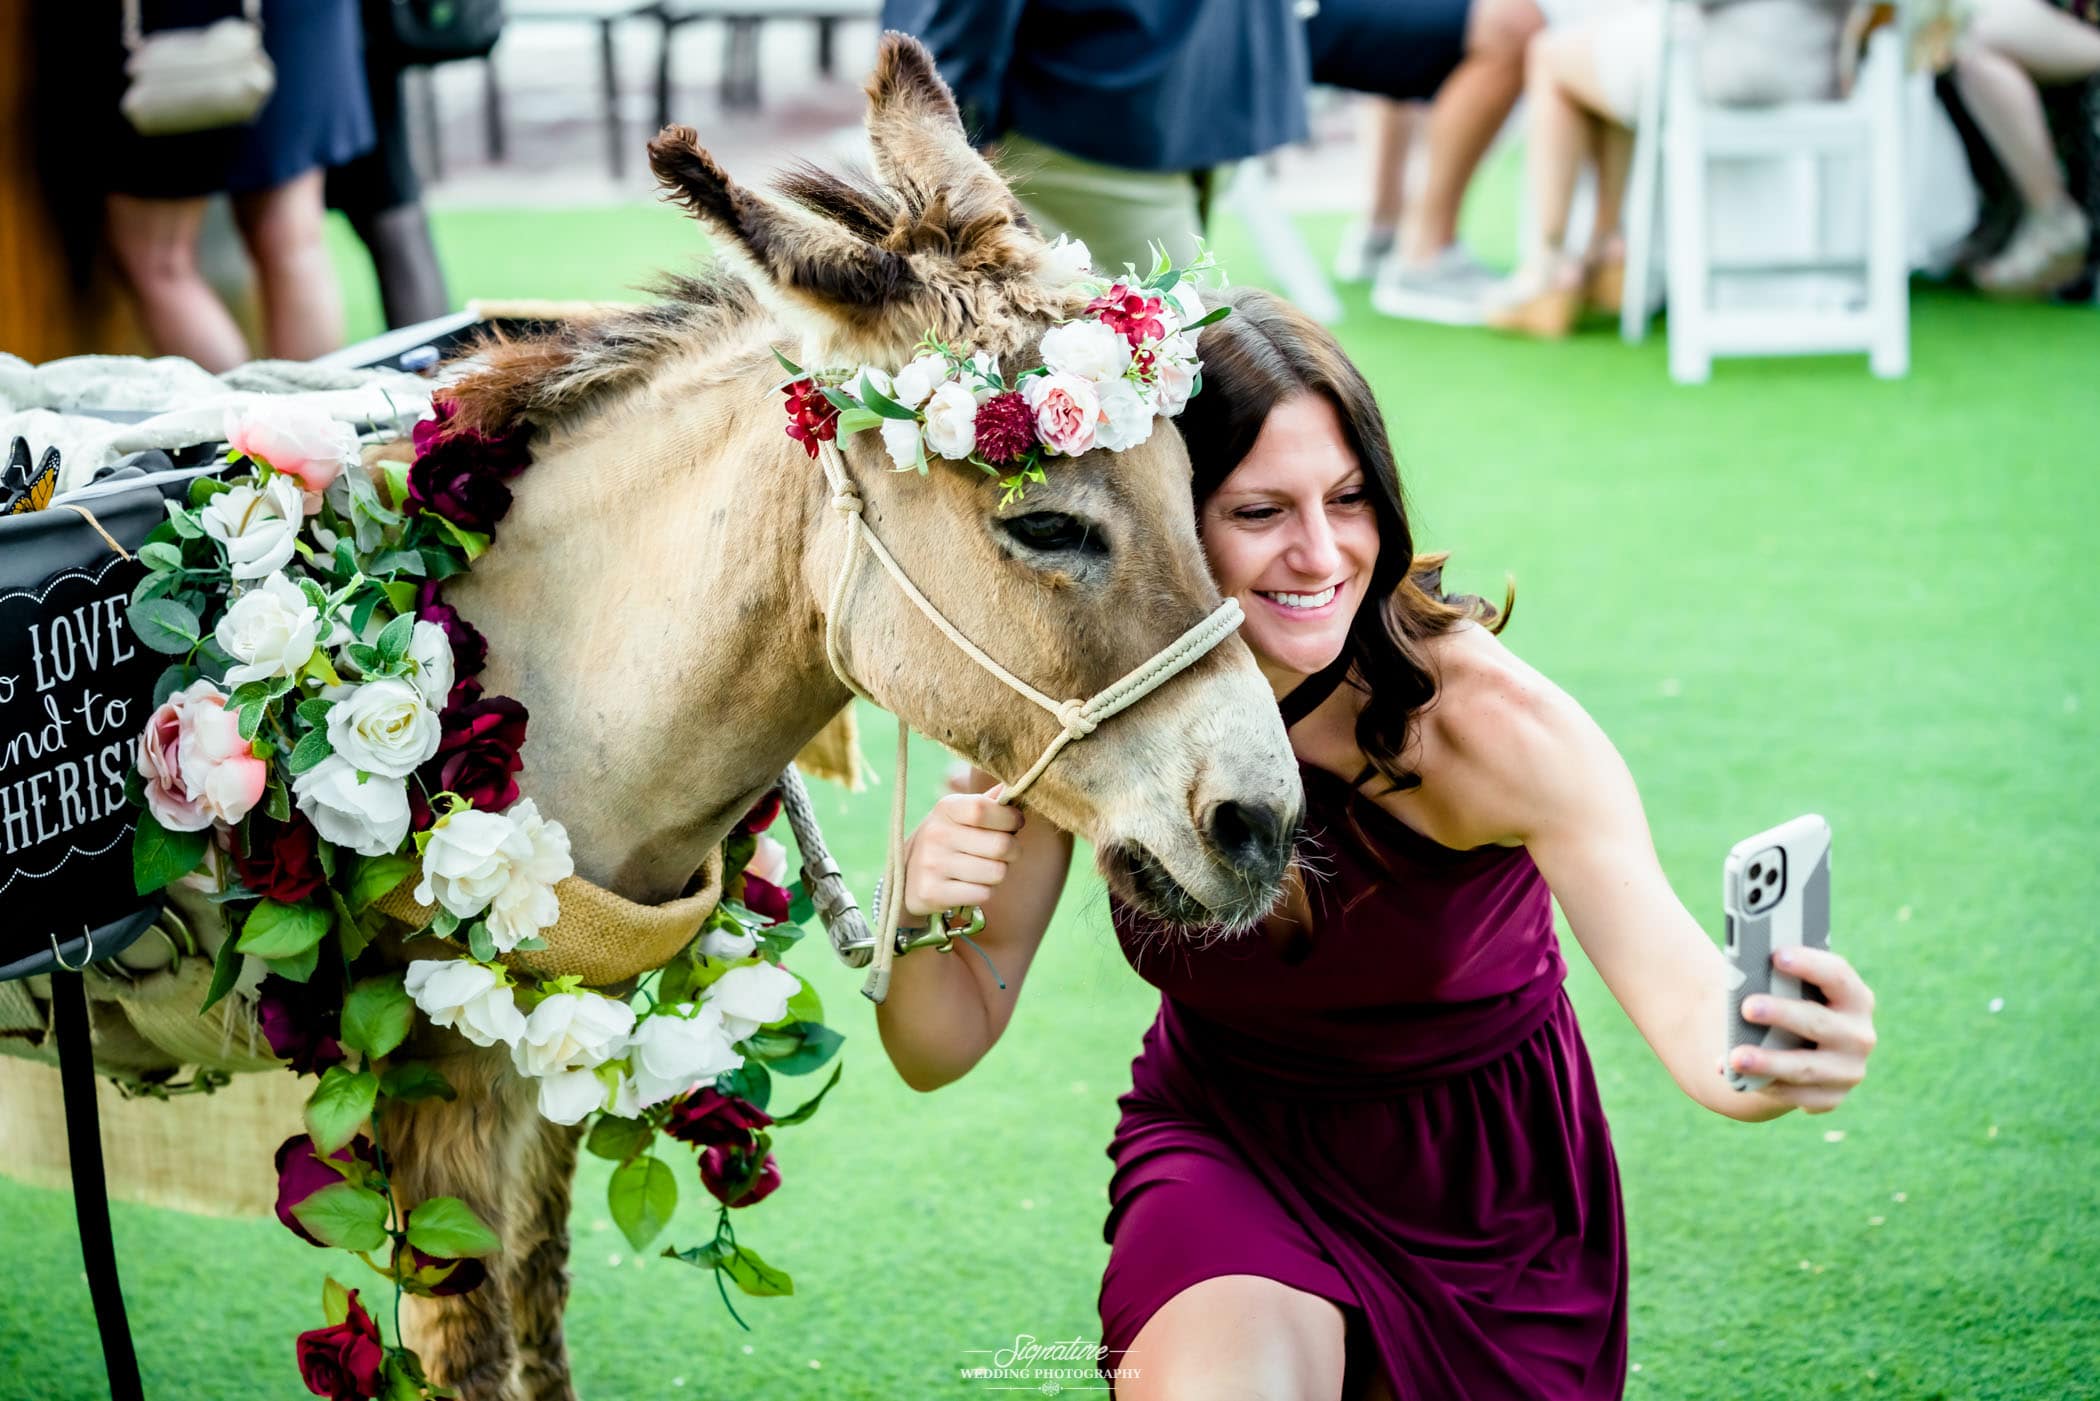 Woman taking picture with donkey in flowers